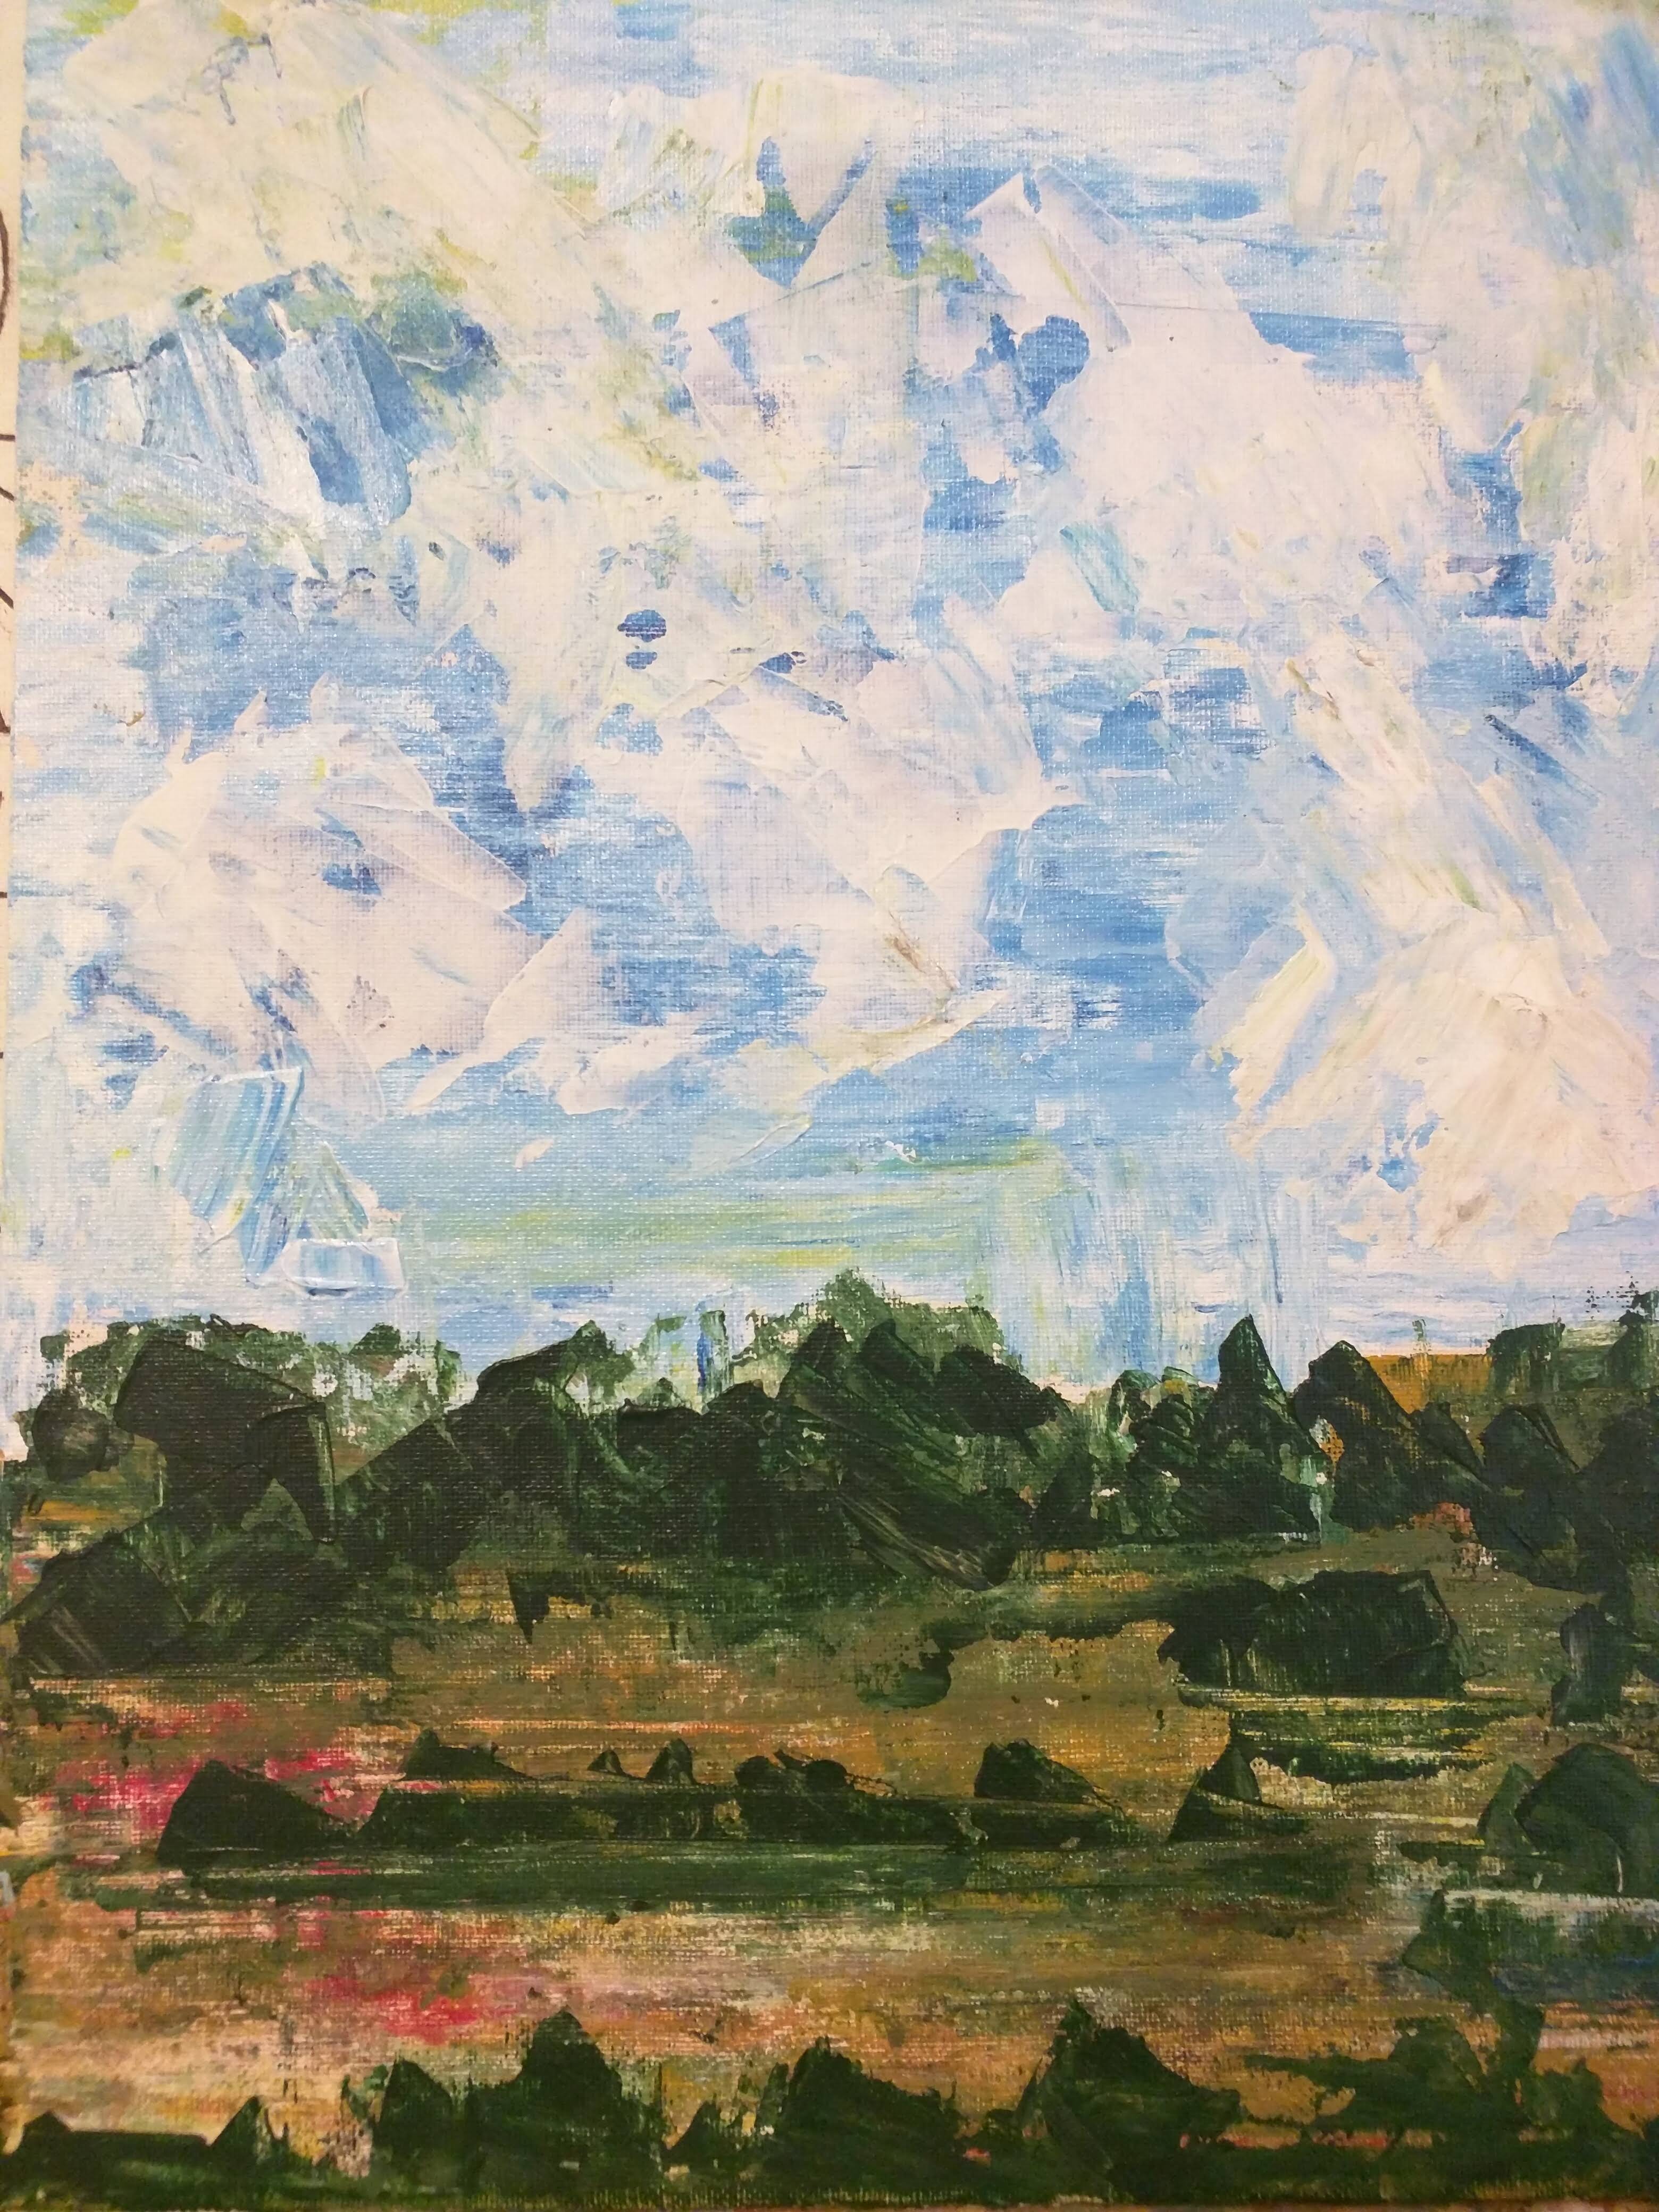 Absract painting of a landscape